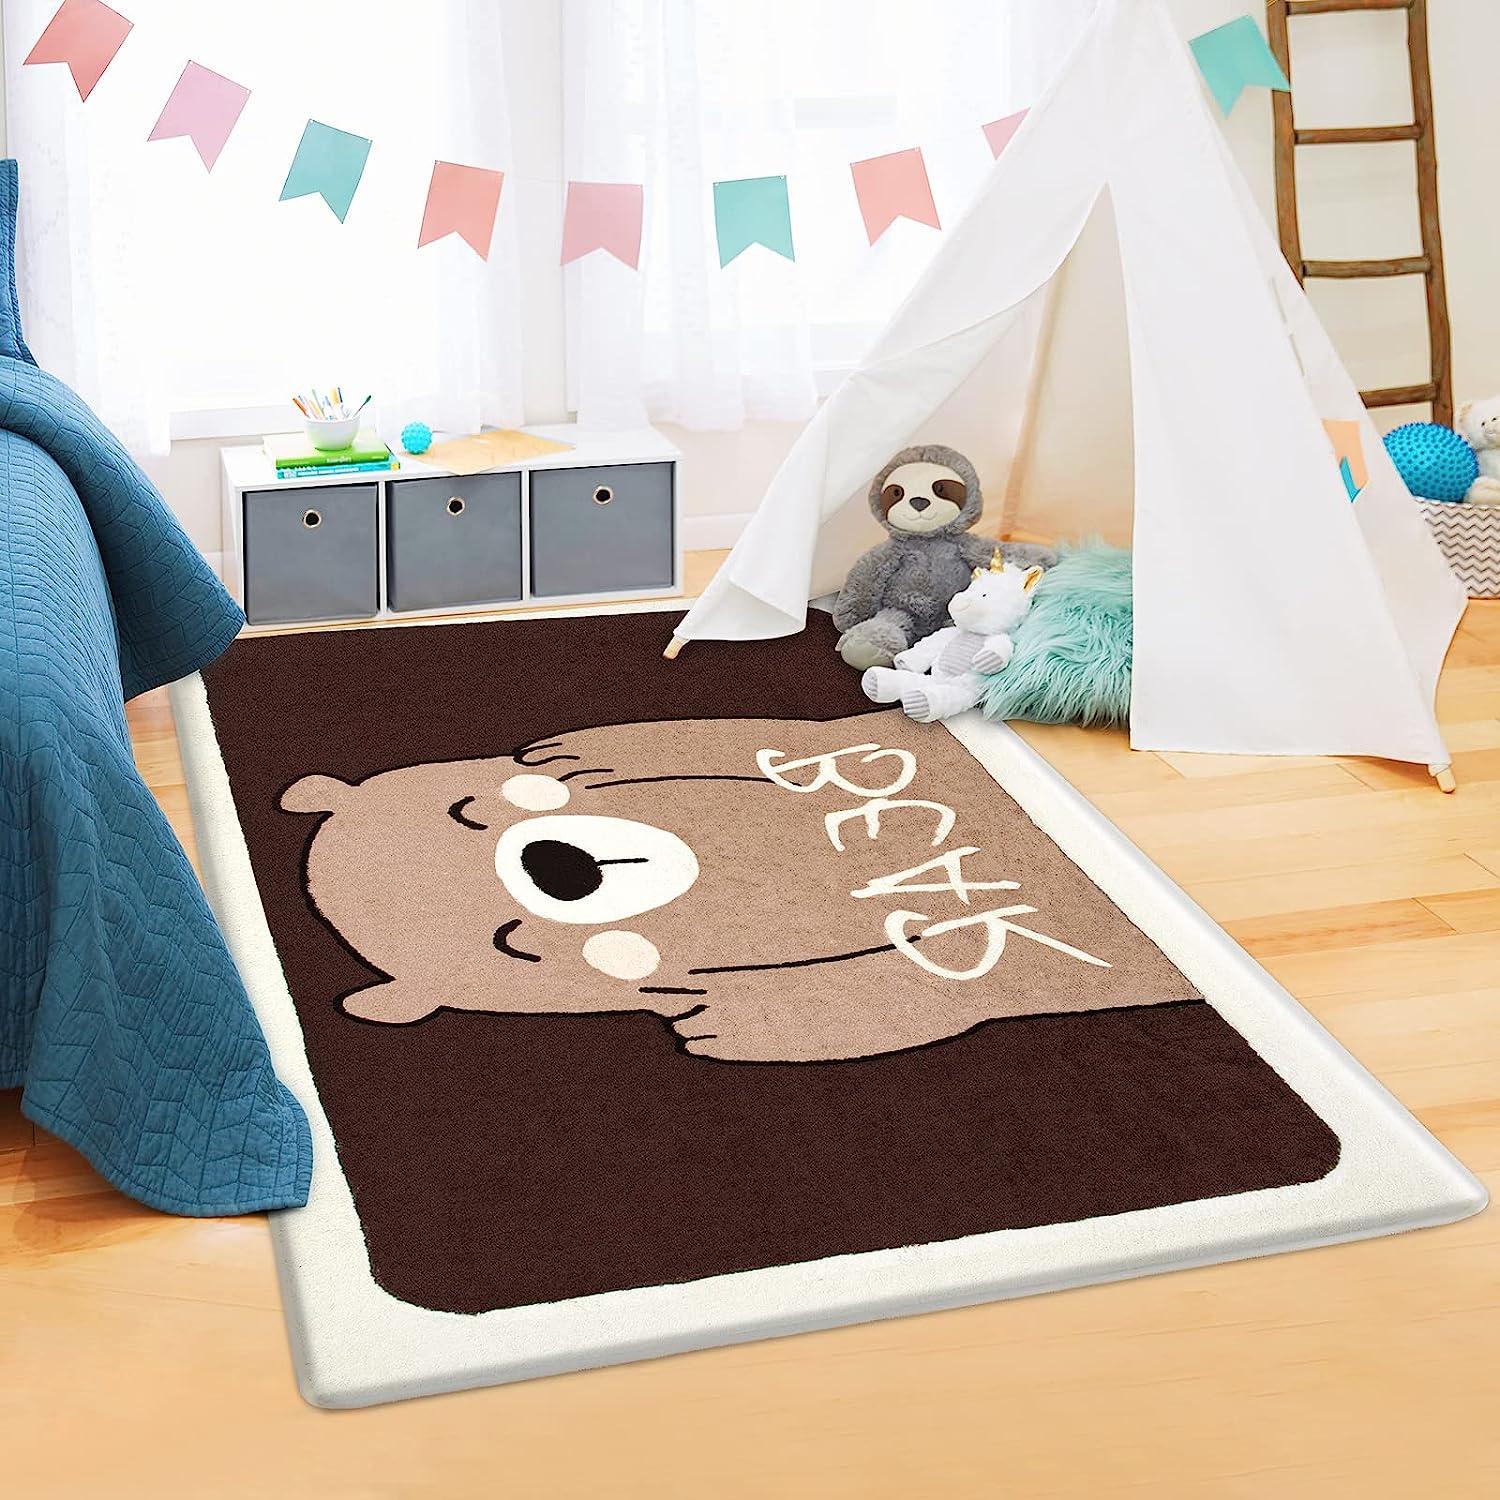 Non Toxic Rugs for Baby